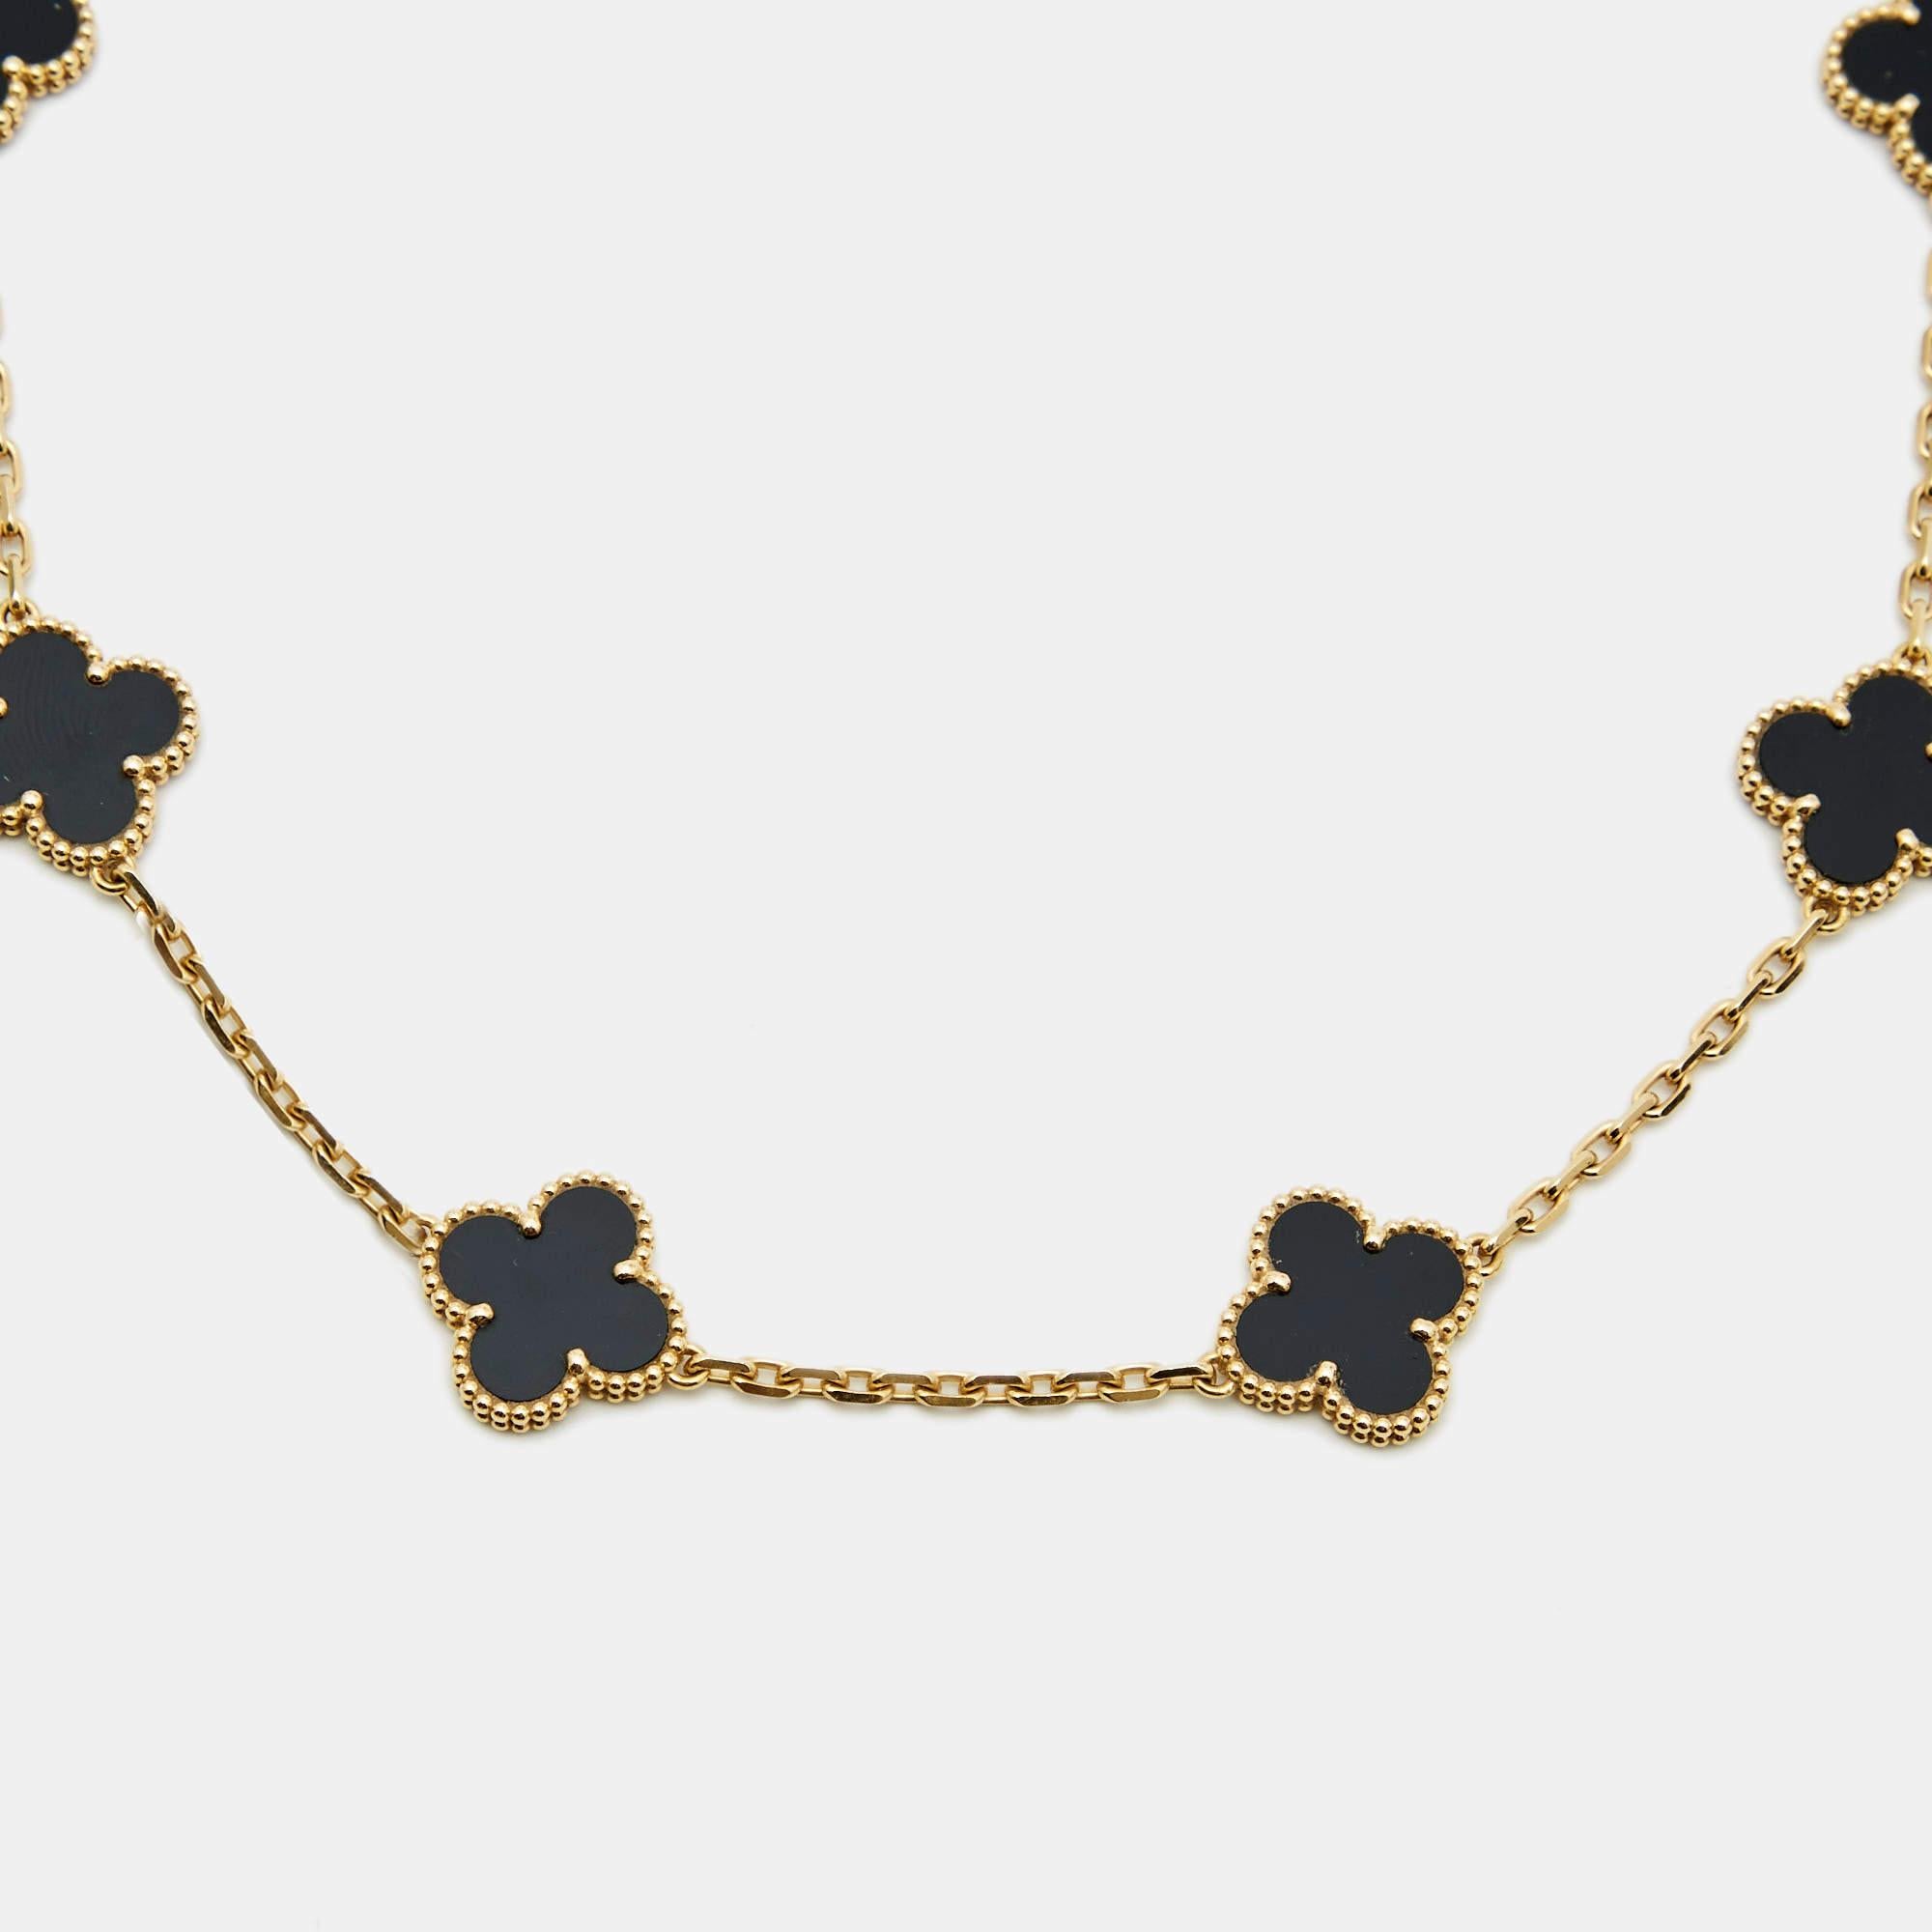 Adorn your neck with this elegant necklace from Van Cleef & Arpels. The necklace has a beautiful weaving of ten motifs crafted from 18k yellow gold and embedded with Onyx stones. The shape of the motifs has been inspired by clover leaves and they